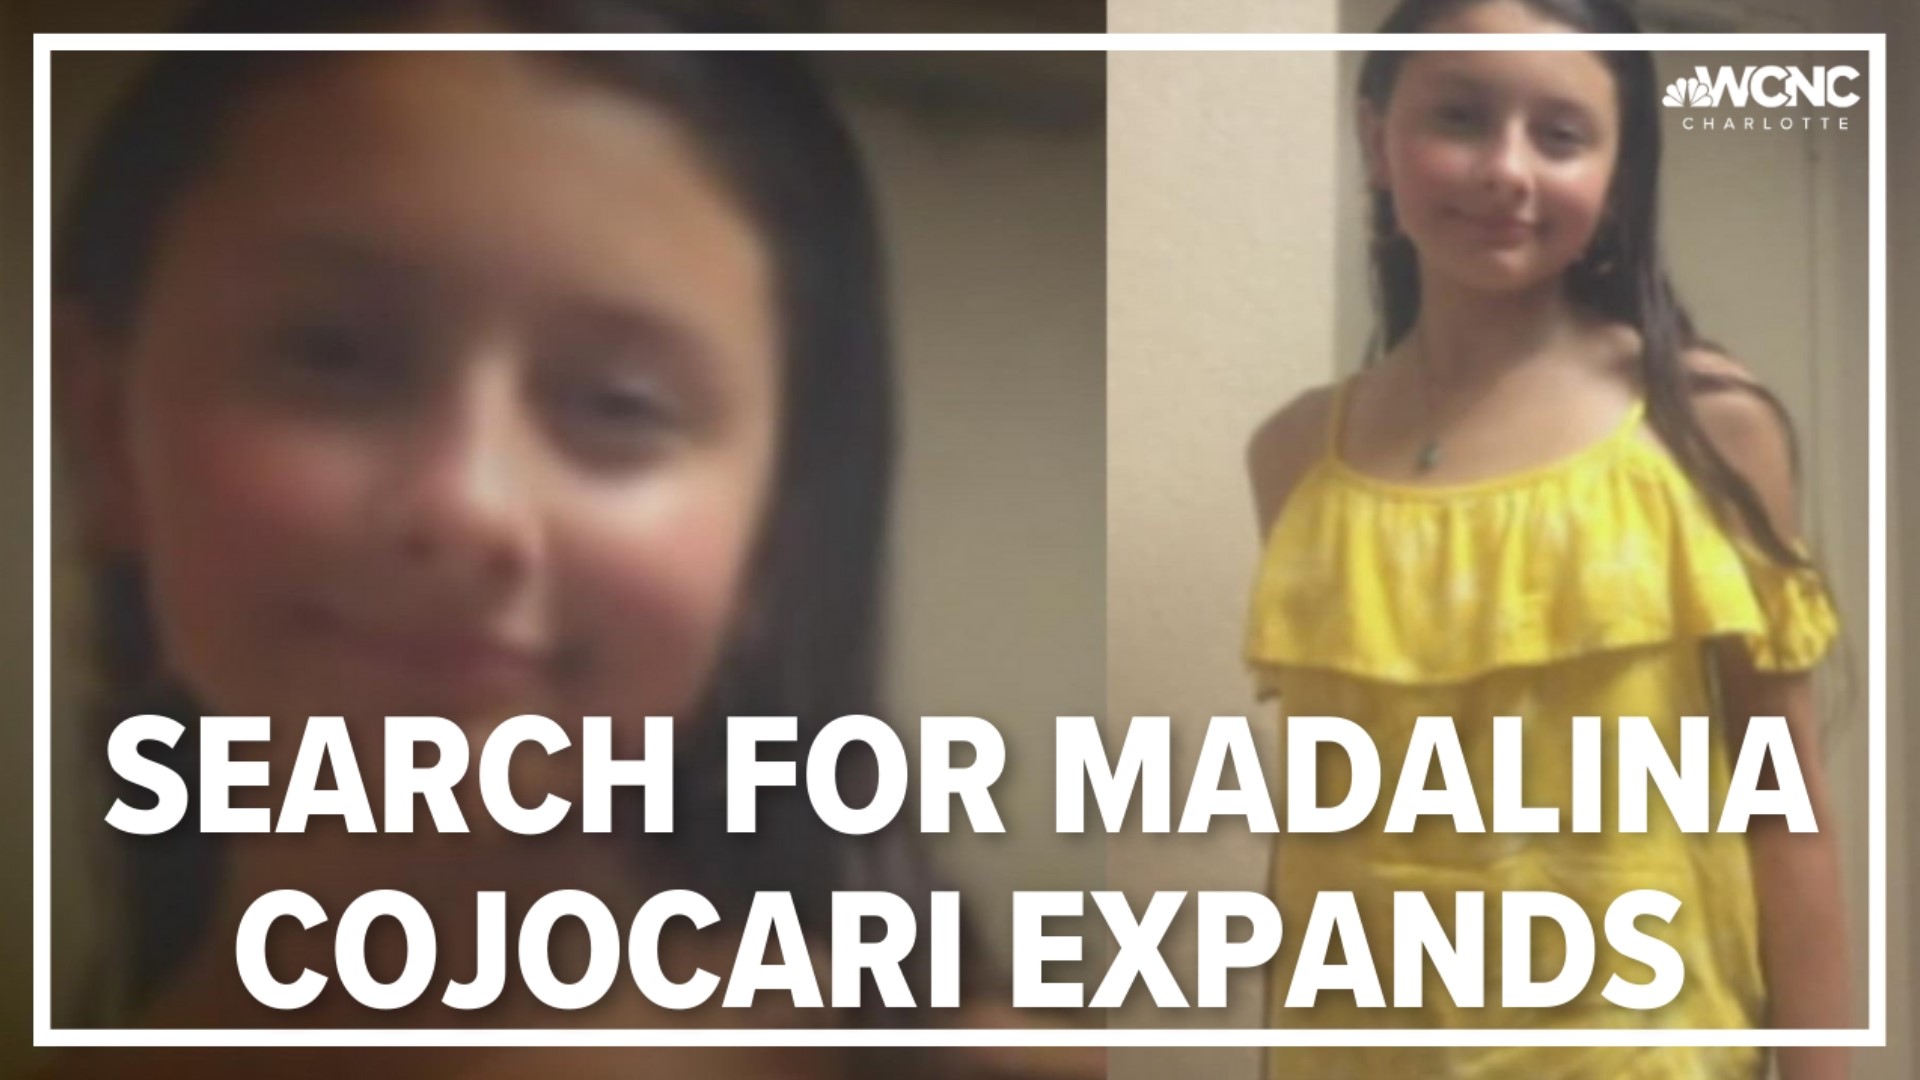 The Cornelius Police Department is asking for additional witness information in connection to the case of missing 11-year-old Madalina Cojocari.